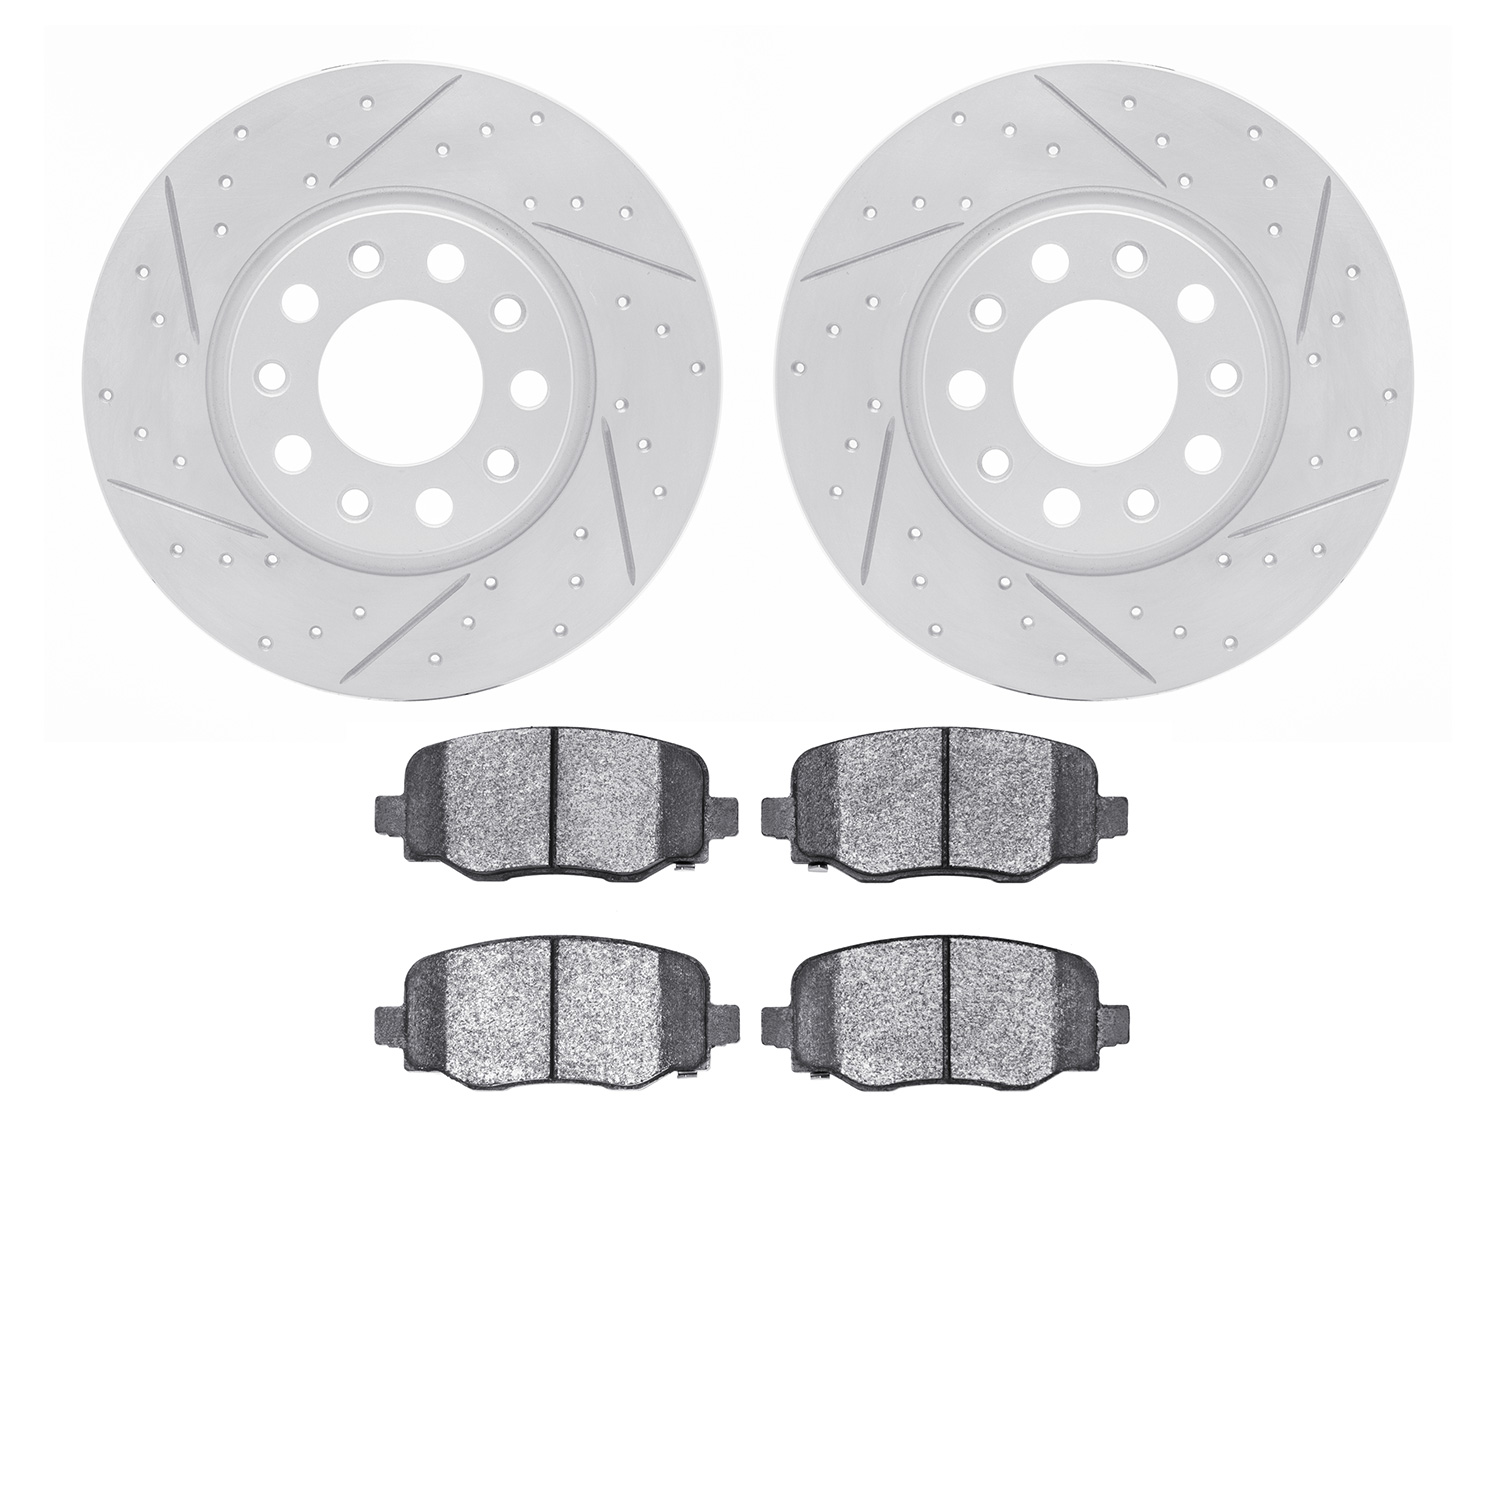 2502-42045 Geoperformance Drilled/Slotted Rotors w/5000 Advanced Brake Pads Kit, Fits Select Mopar, Position: Rear